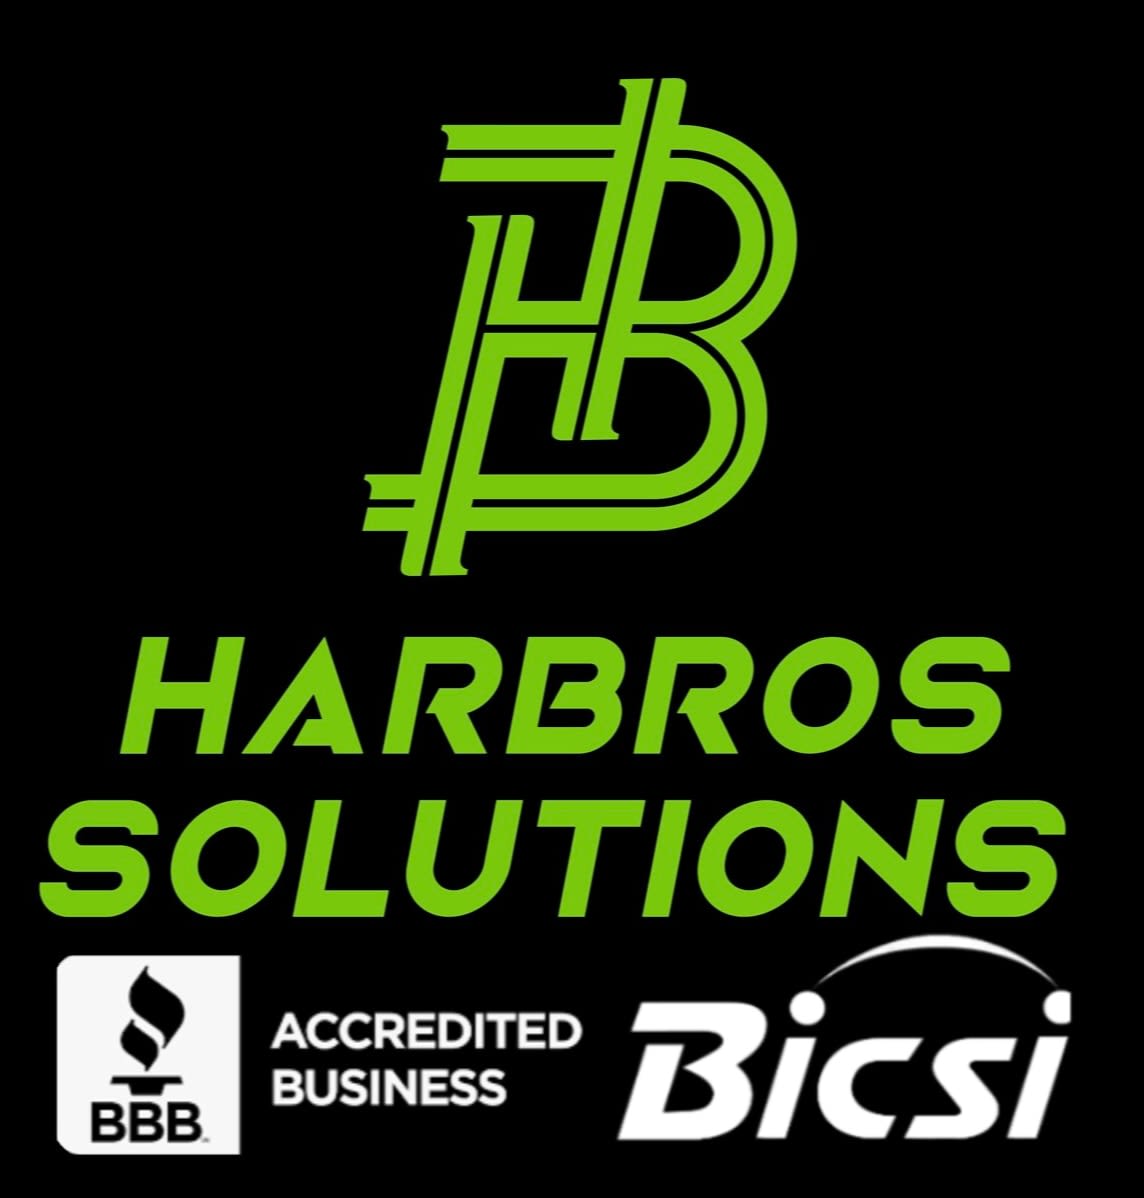 HARBROS SOLUTIONS